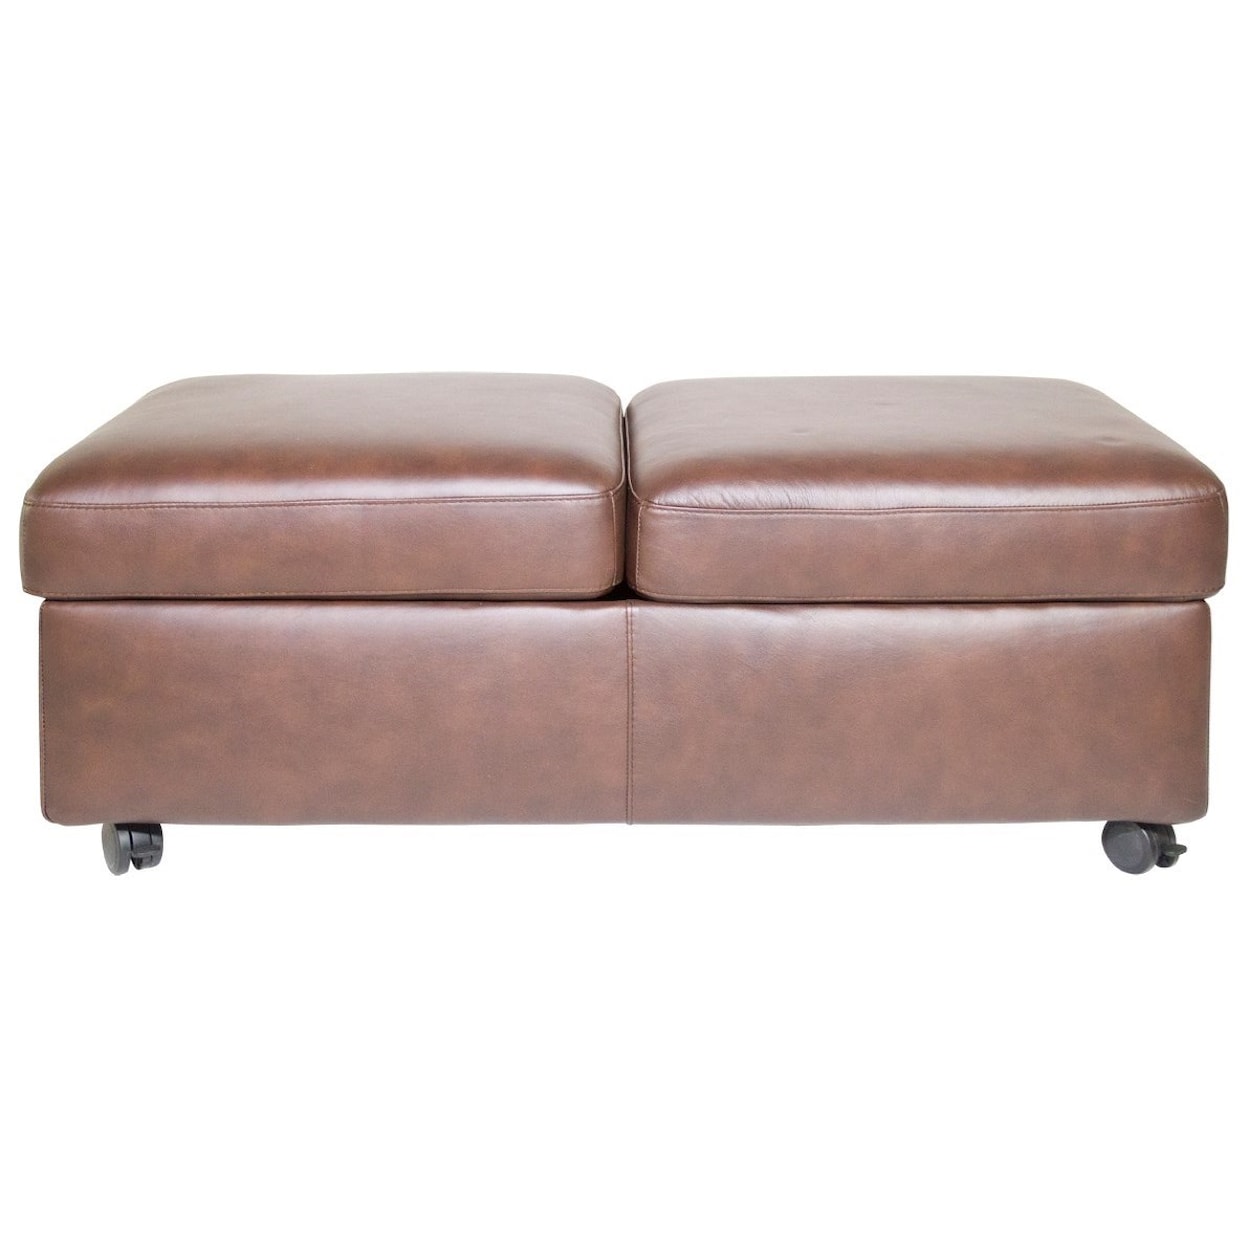 Stressless by Ekornes Ottomans Double Ottoman and Table